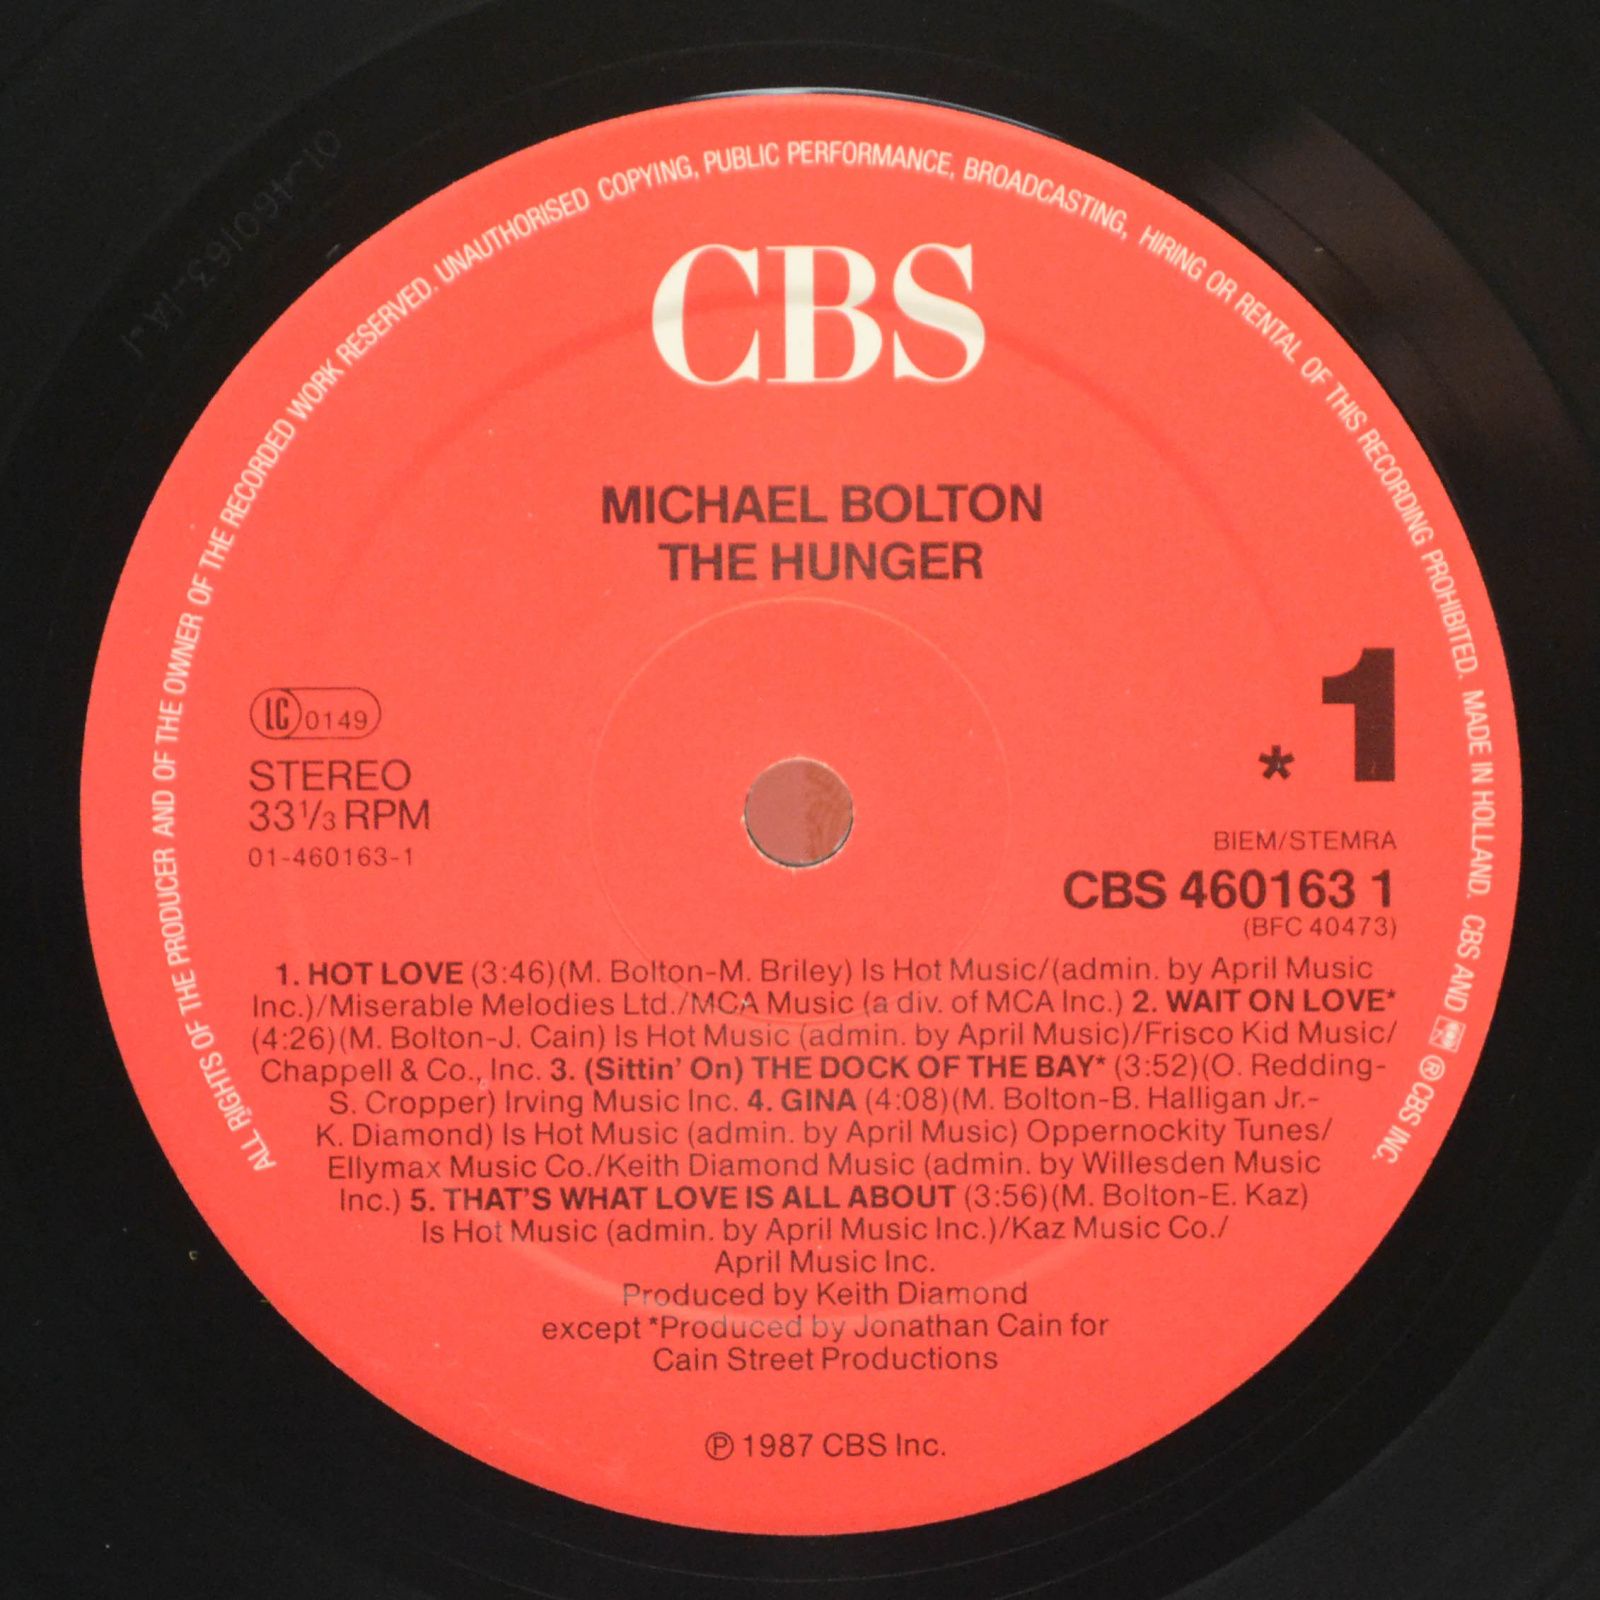 Michael Bolton — The Hunger, 1987